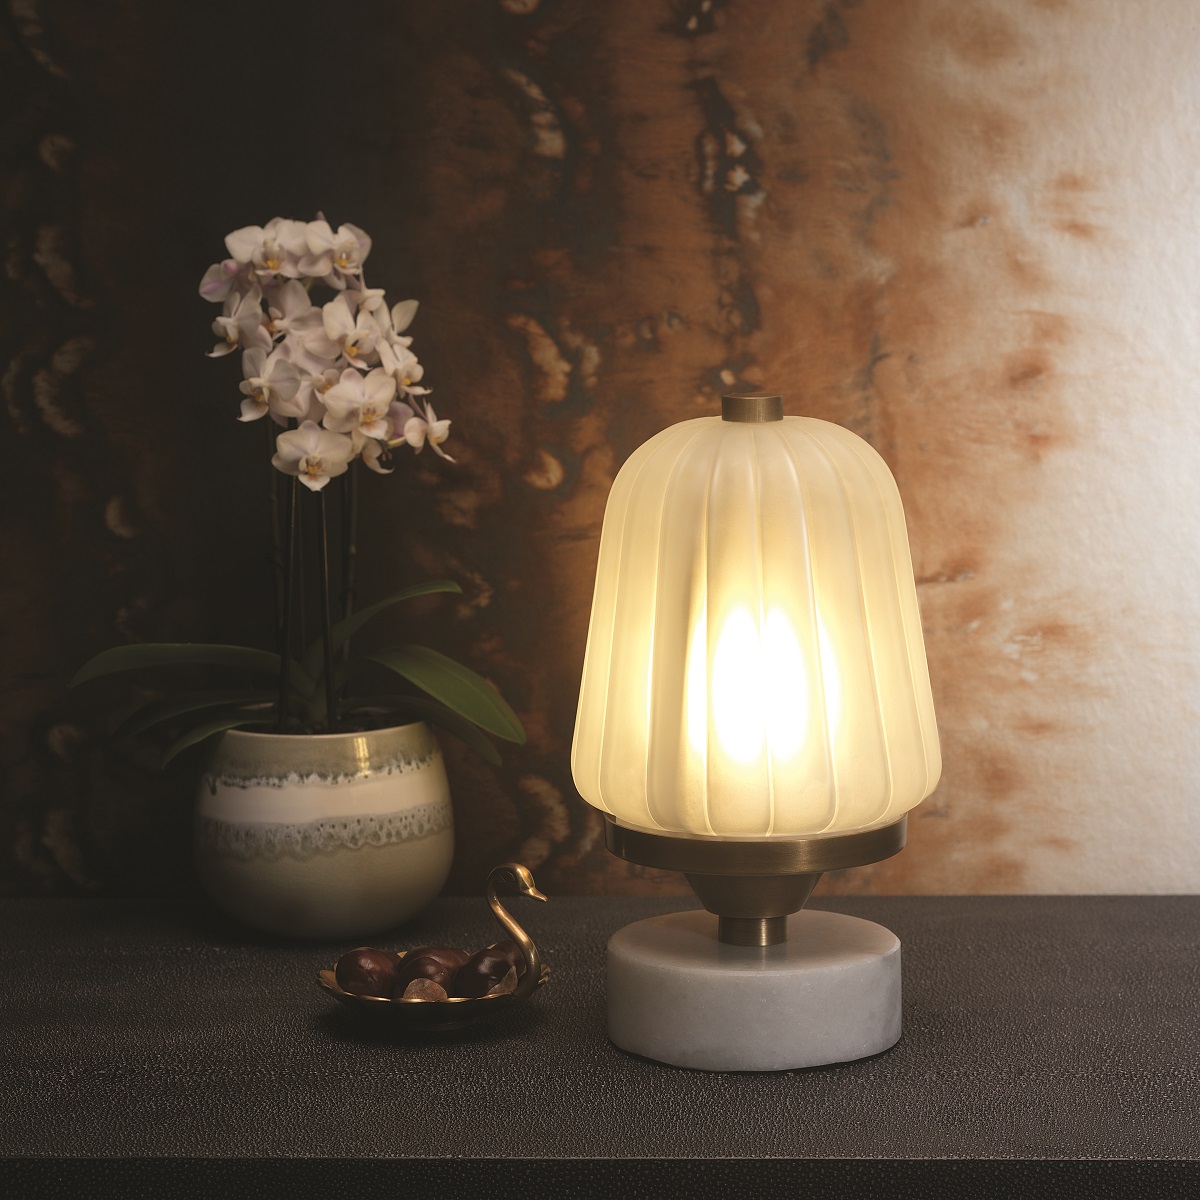 Balfour table top mood light by Northern Lights